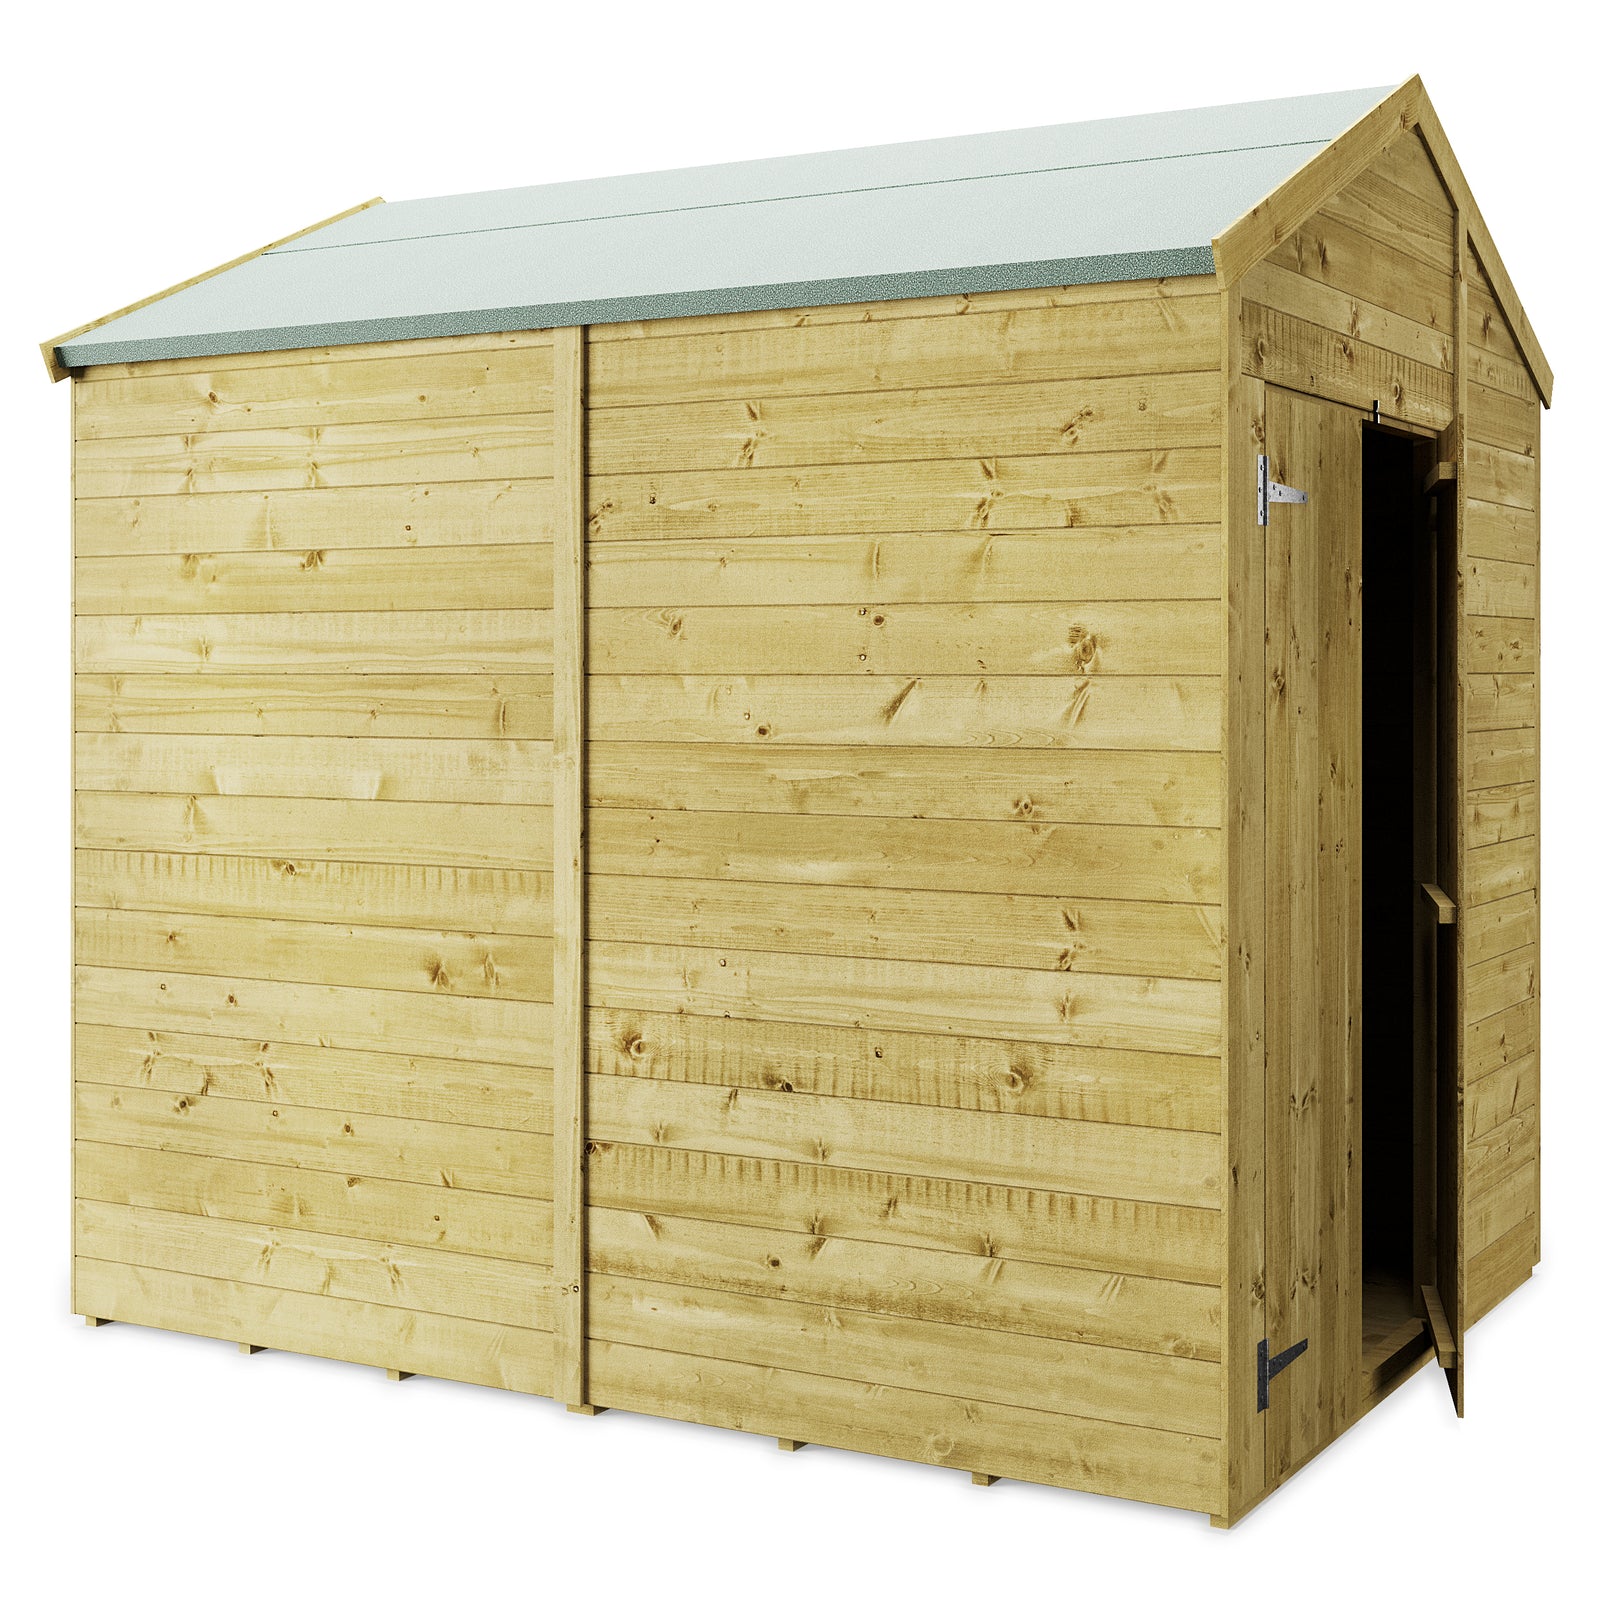 Store More Tongue and Groove Apex Shed - 8x6 Windowless